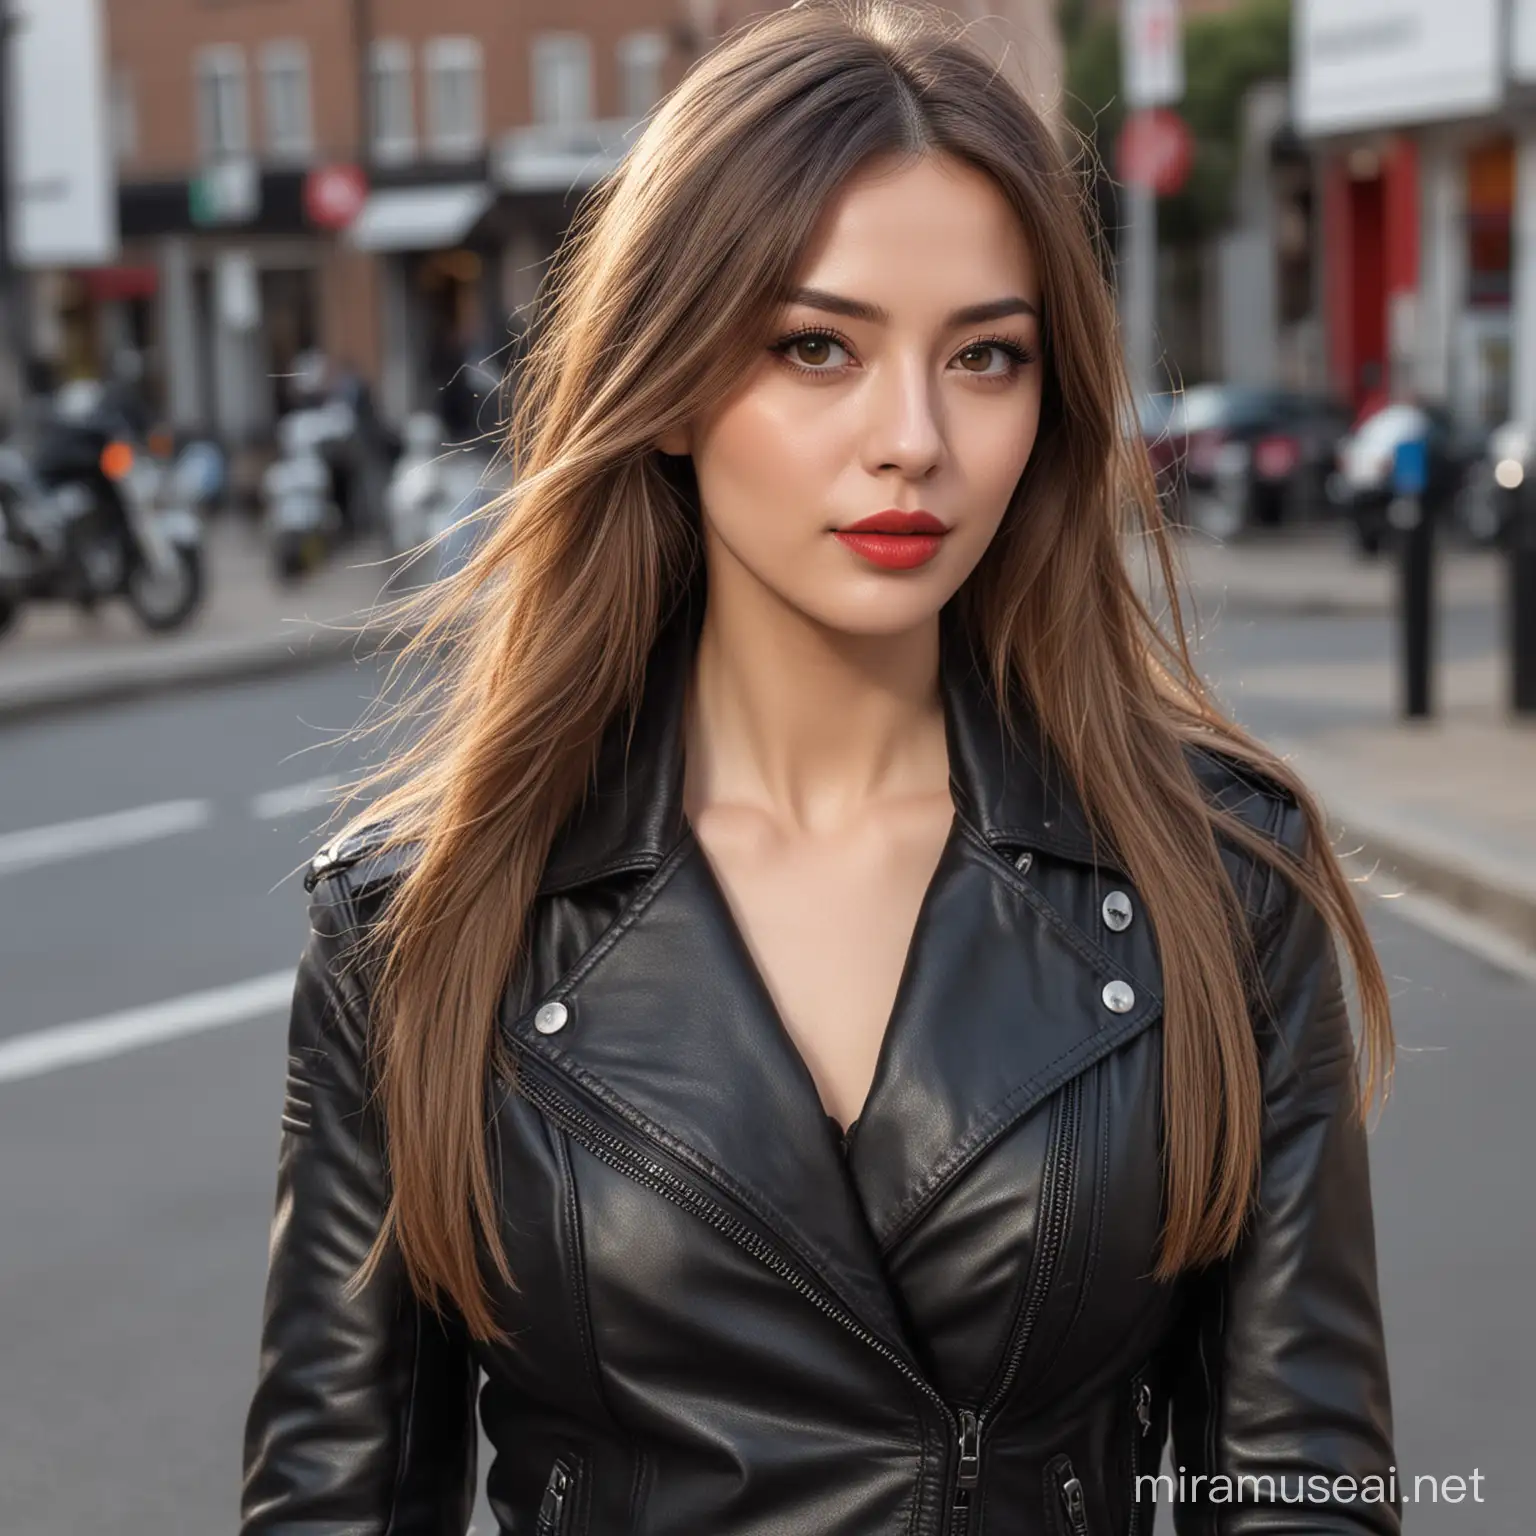 Elegant Woman in Leather Outfit on Urban Street